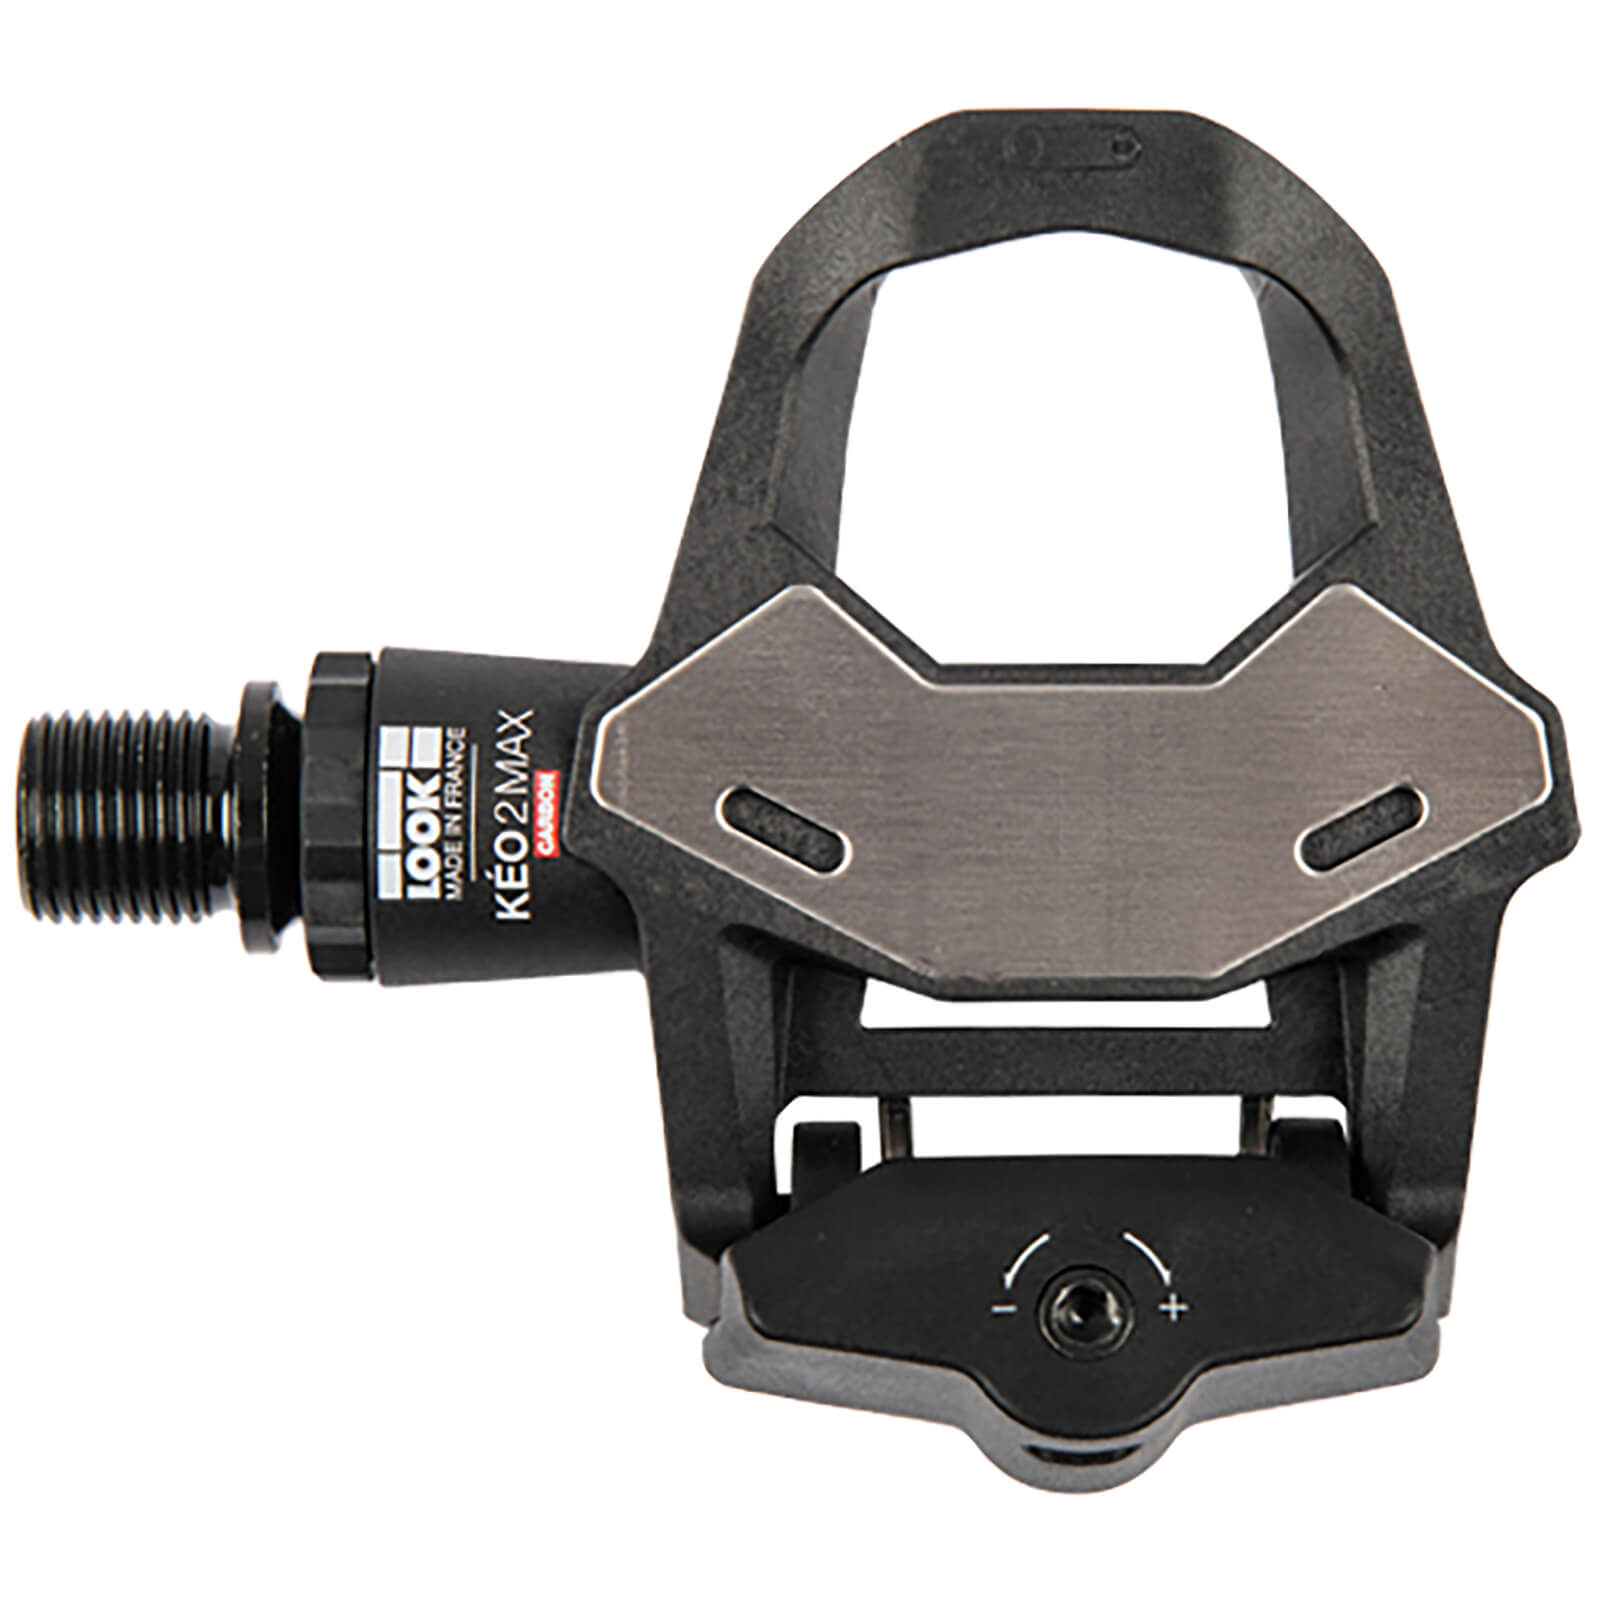 Image of Look Keo 2 Max Carbon Pedals